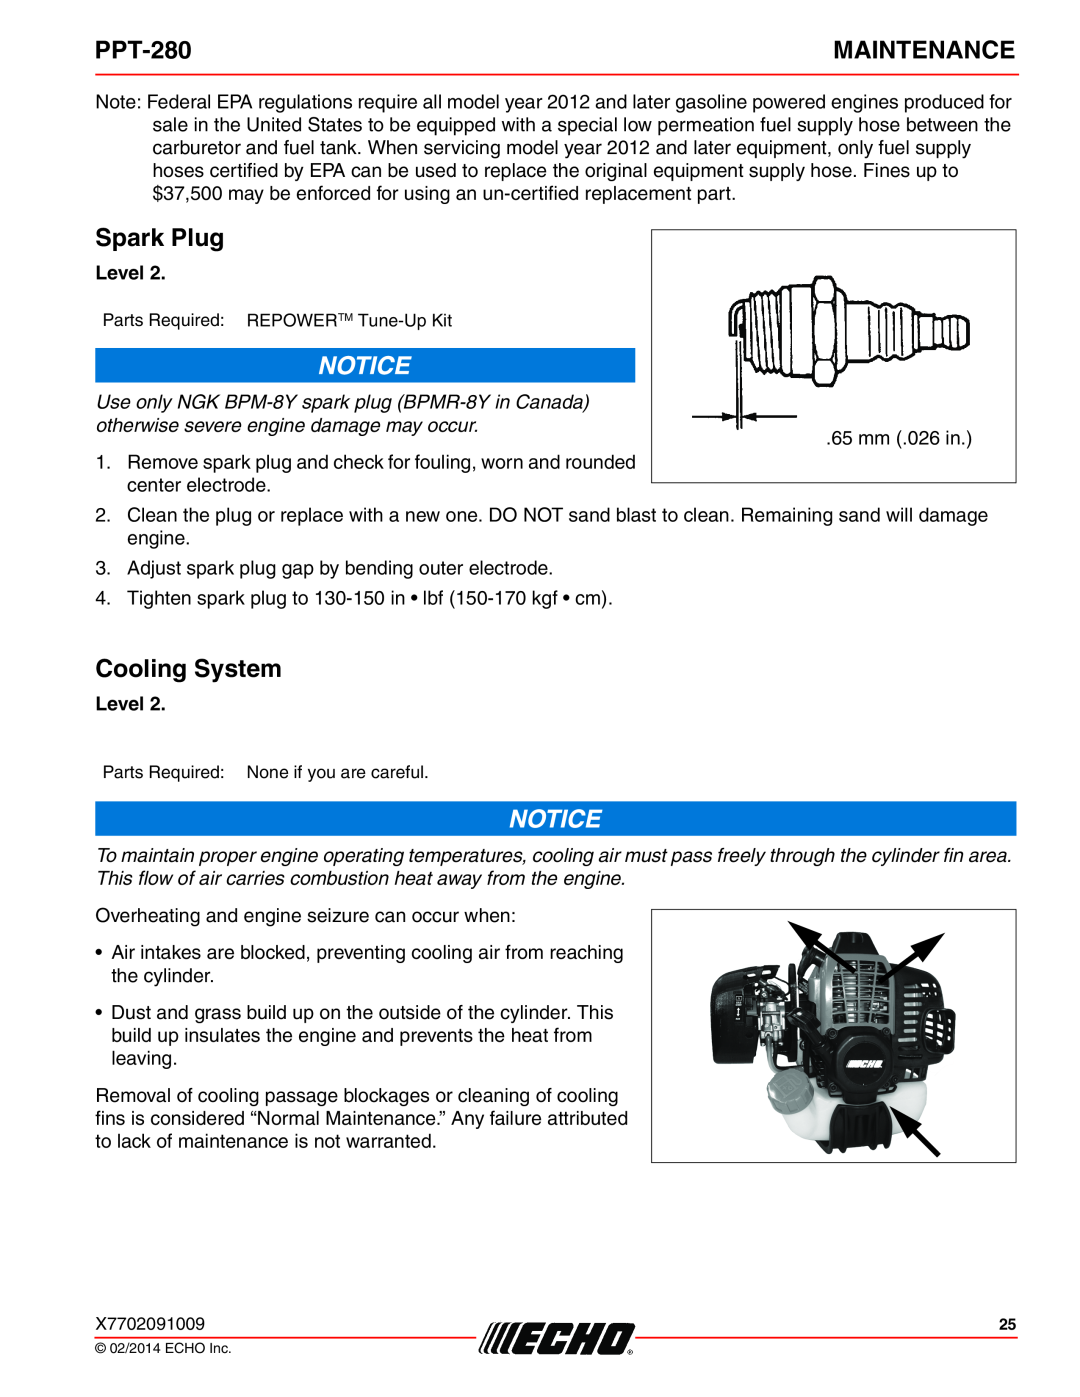 Echo PPT-280 specifications Spark Plug, Cooling System, Maintenance, Level 